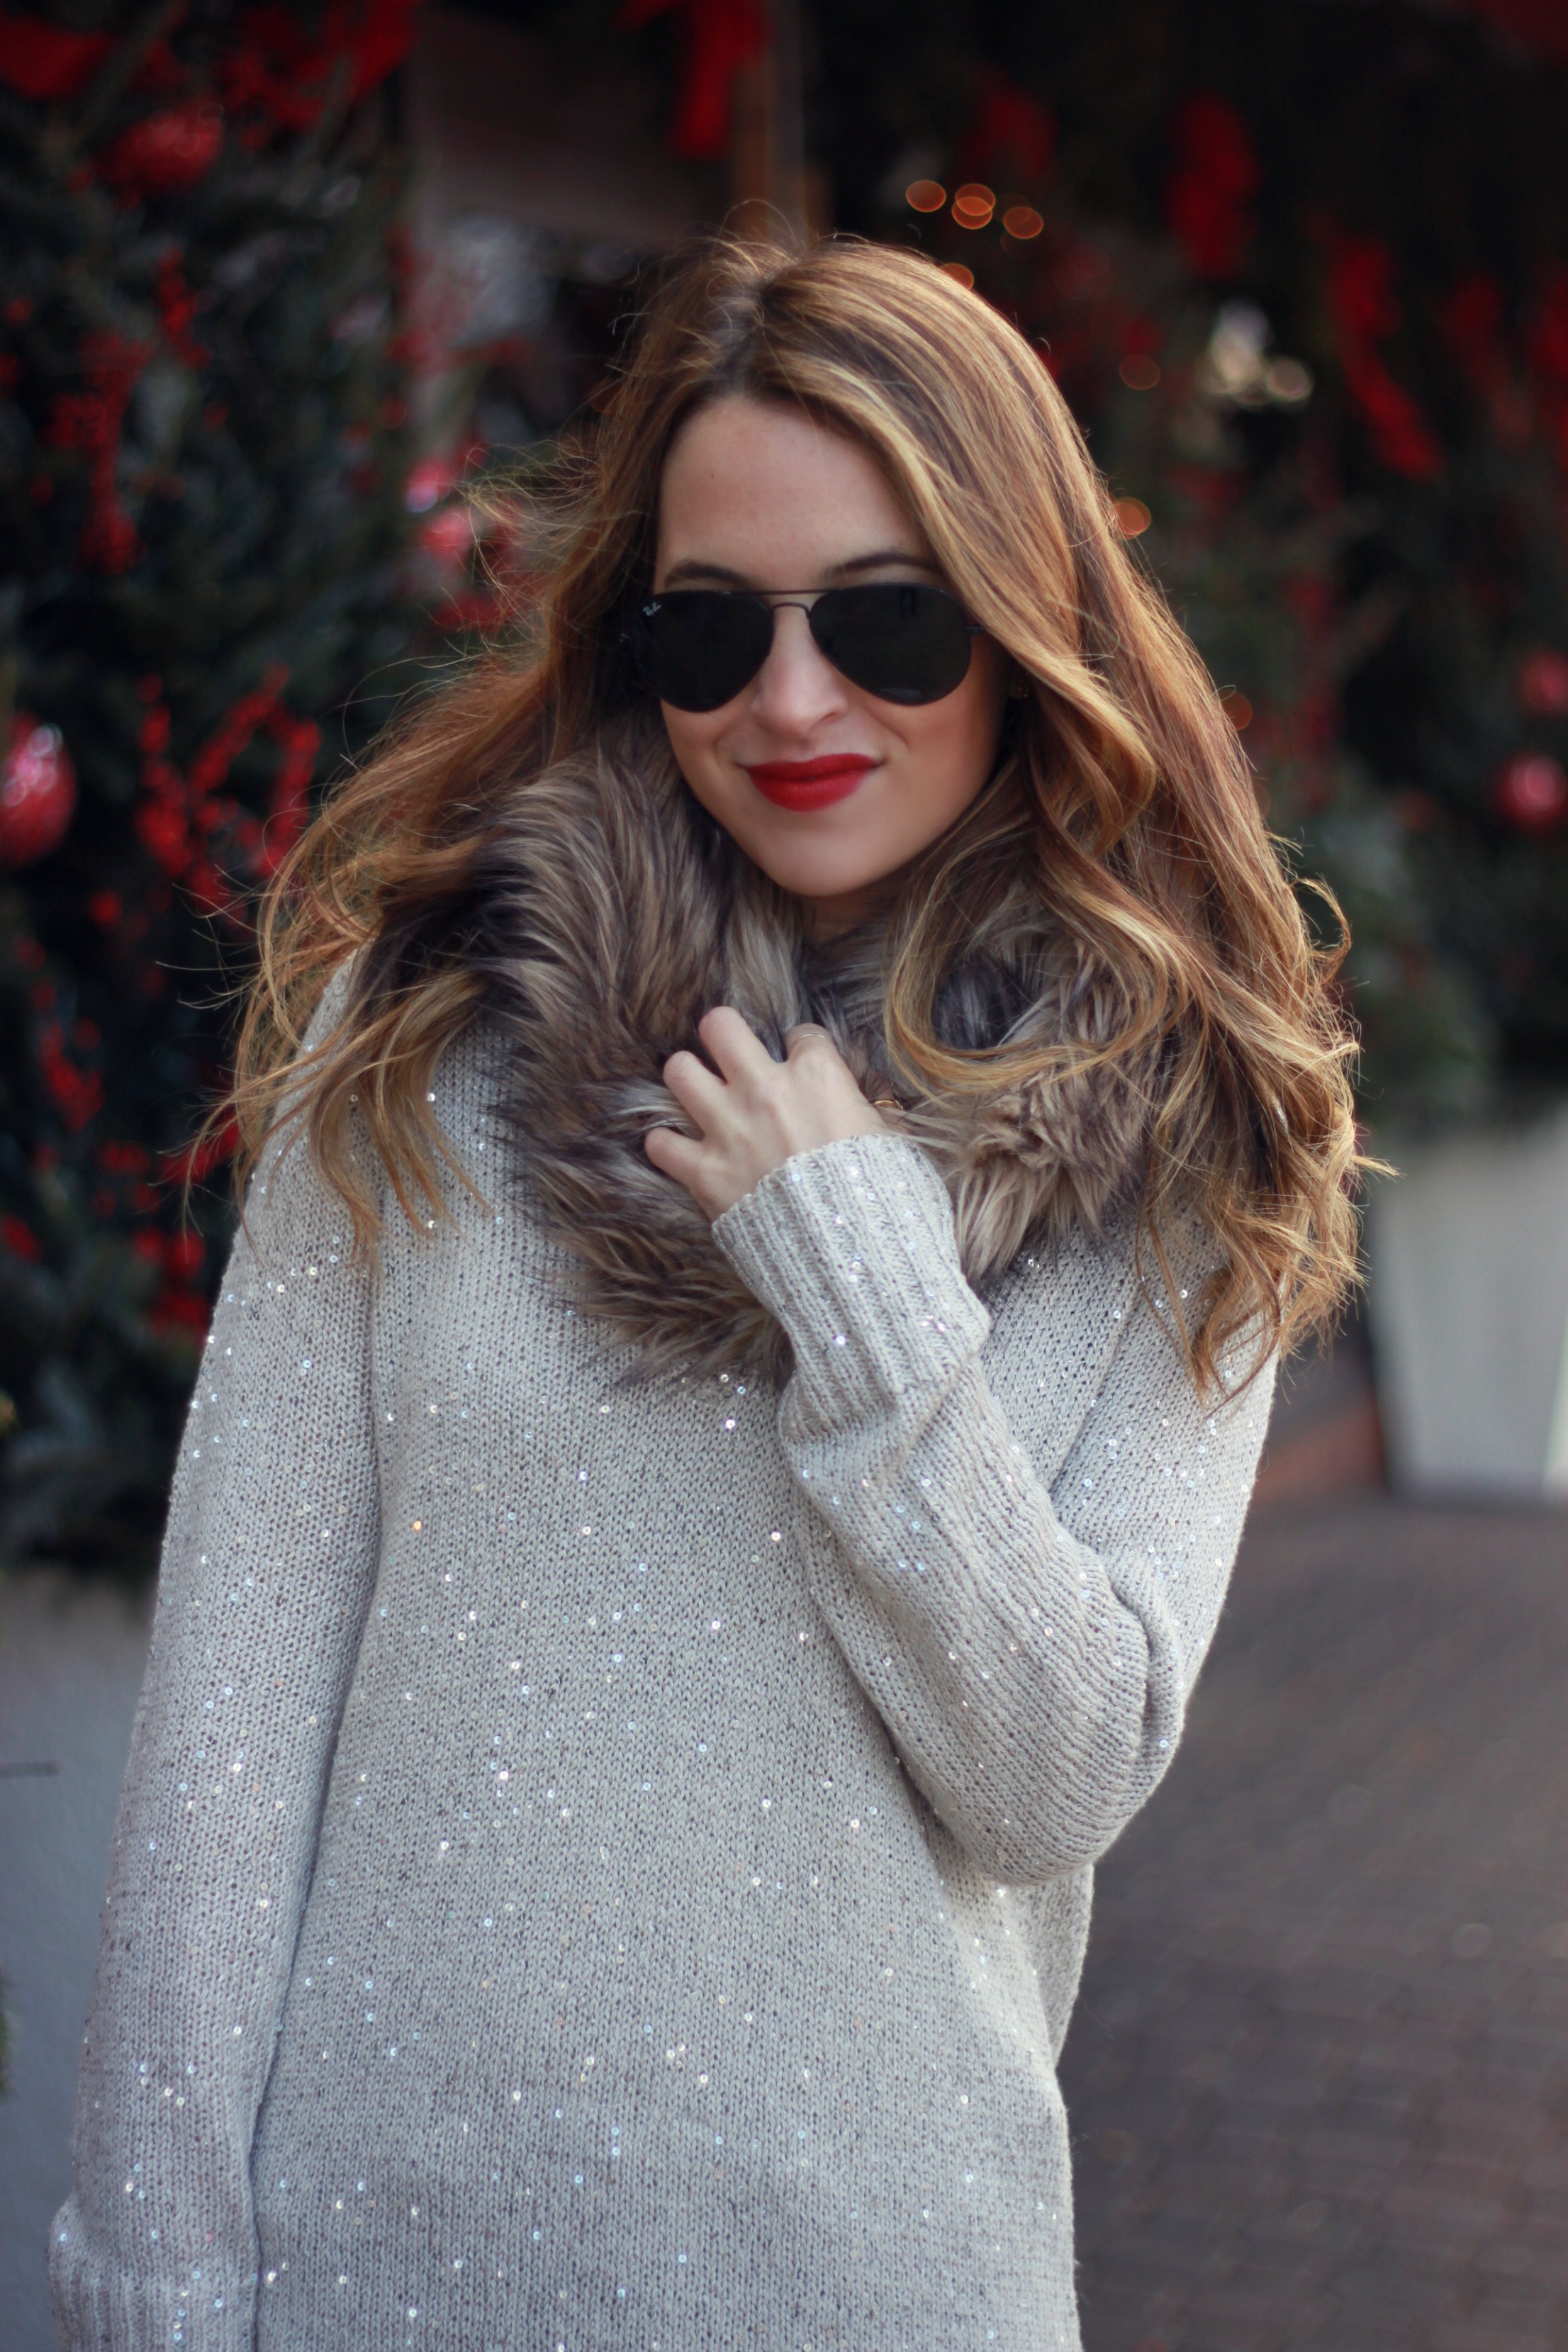 Oh So Glam: Sequin Sweater